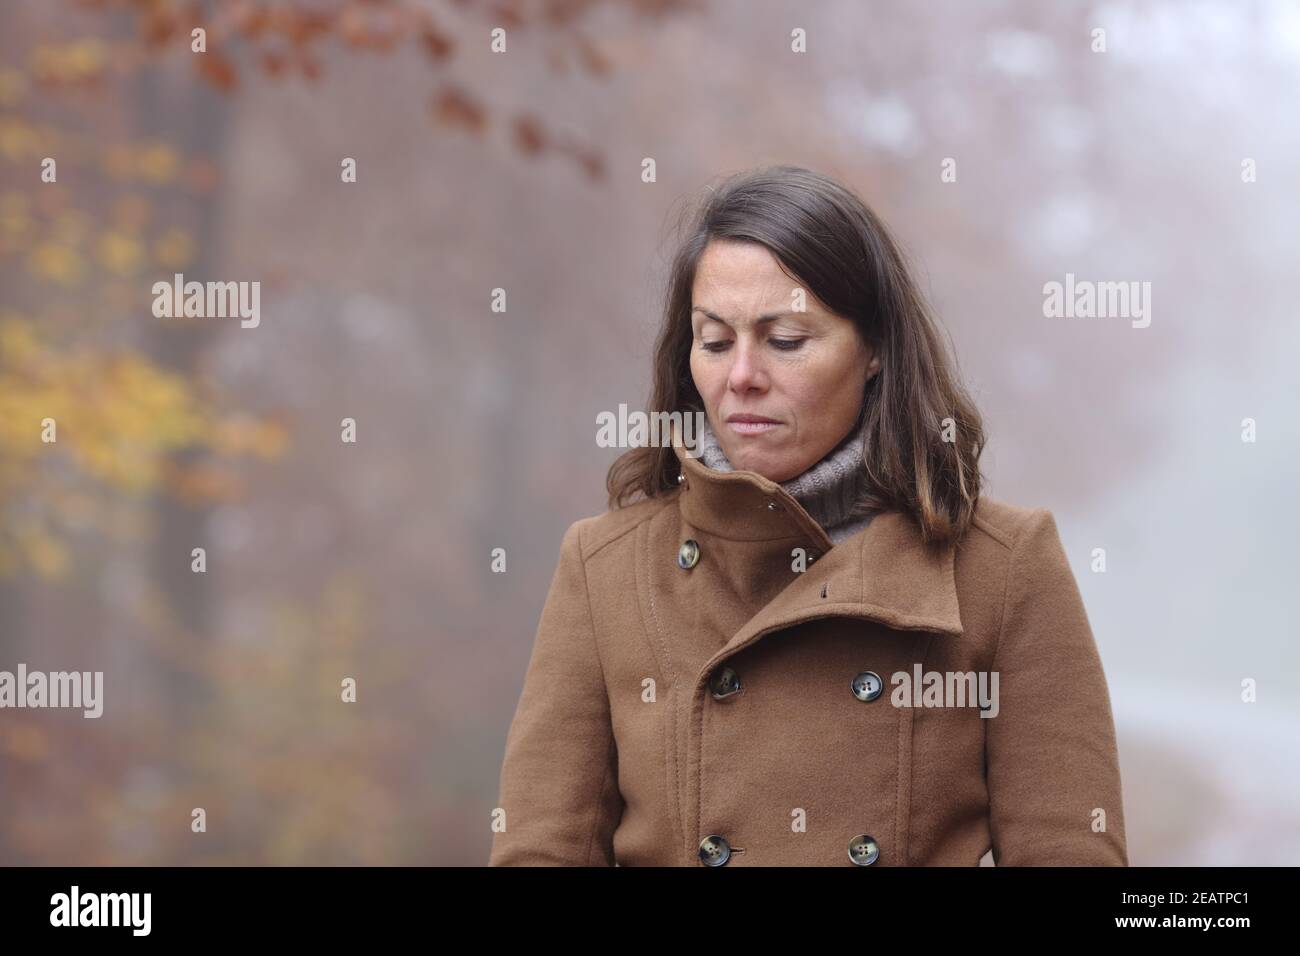 Sad woman walking alone in a park in winter Stock Photo